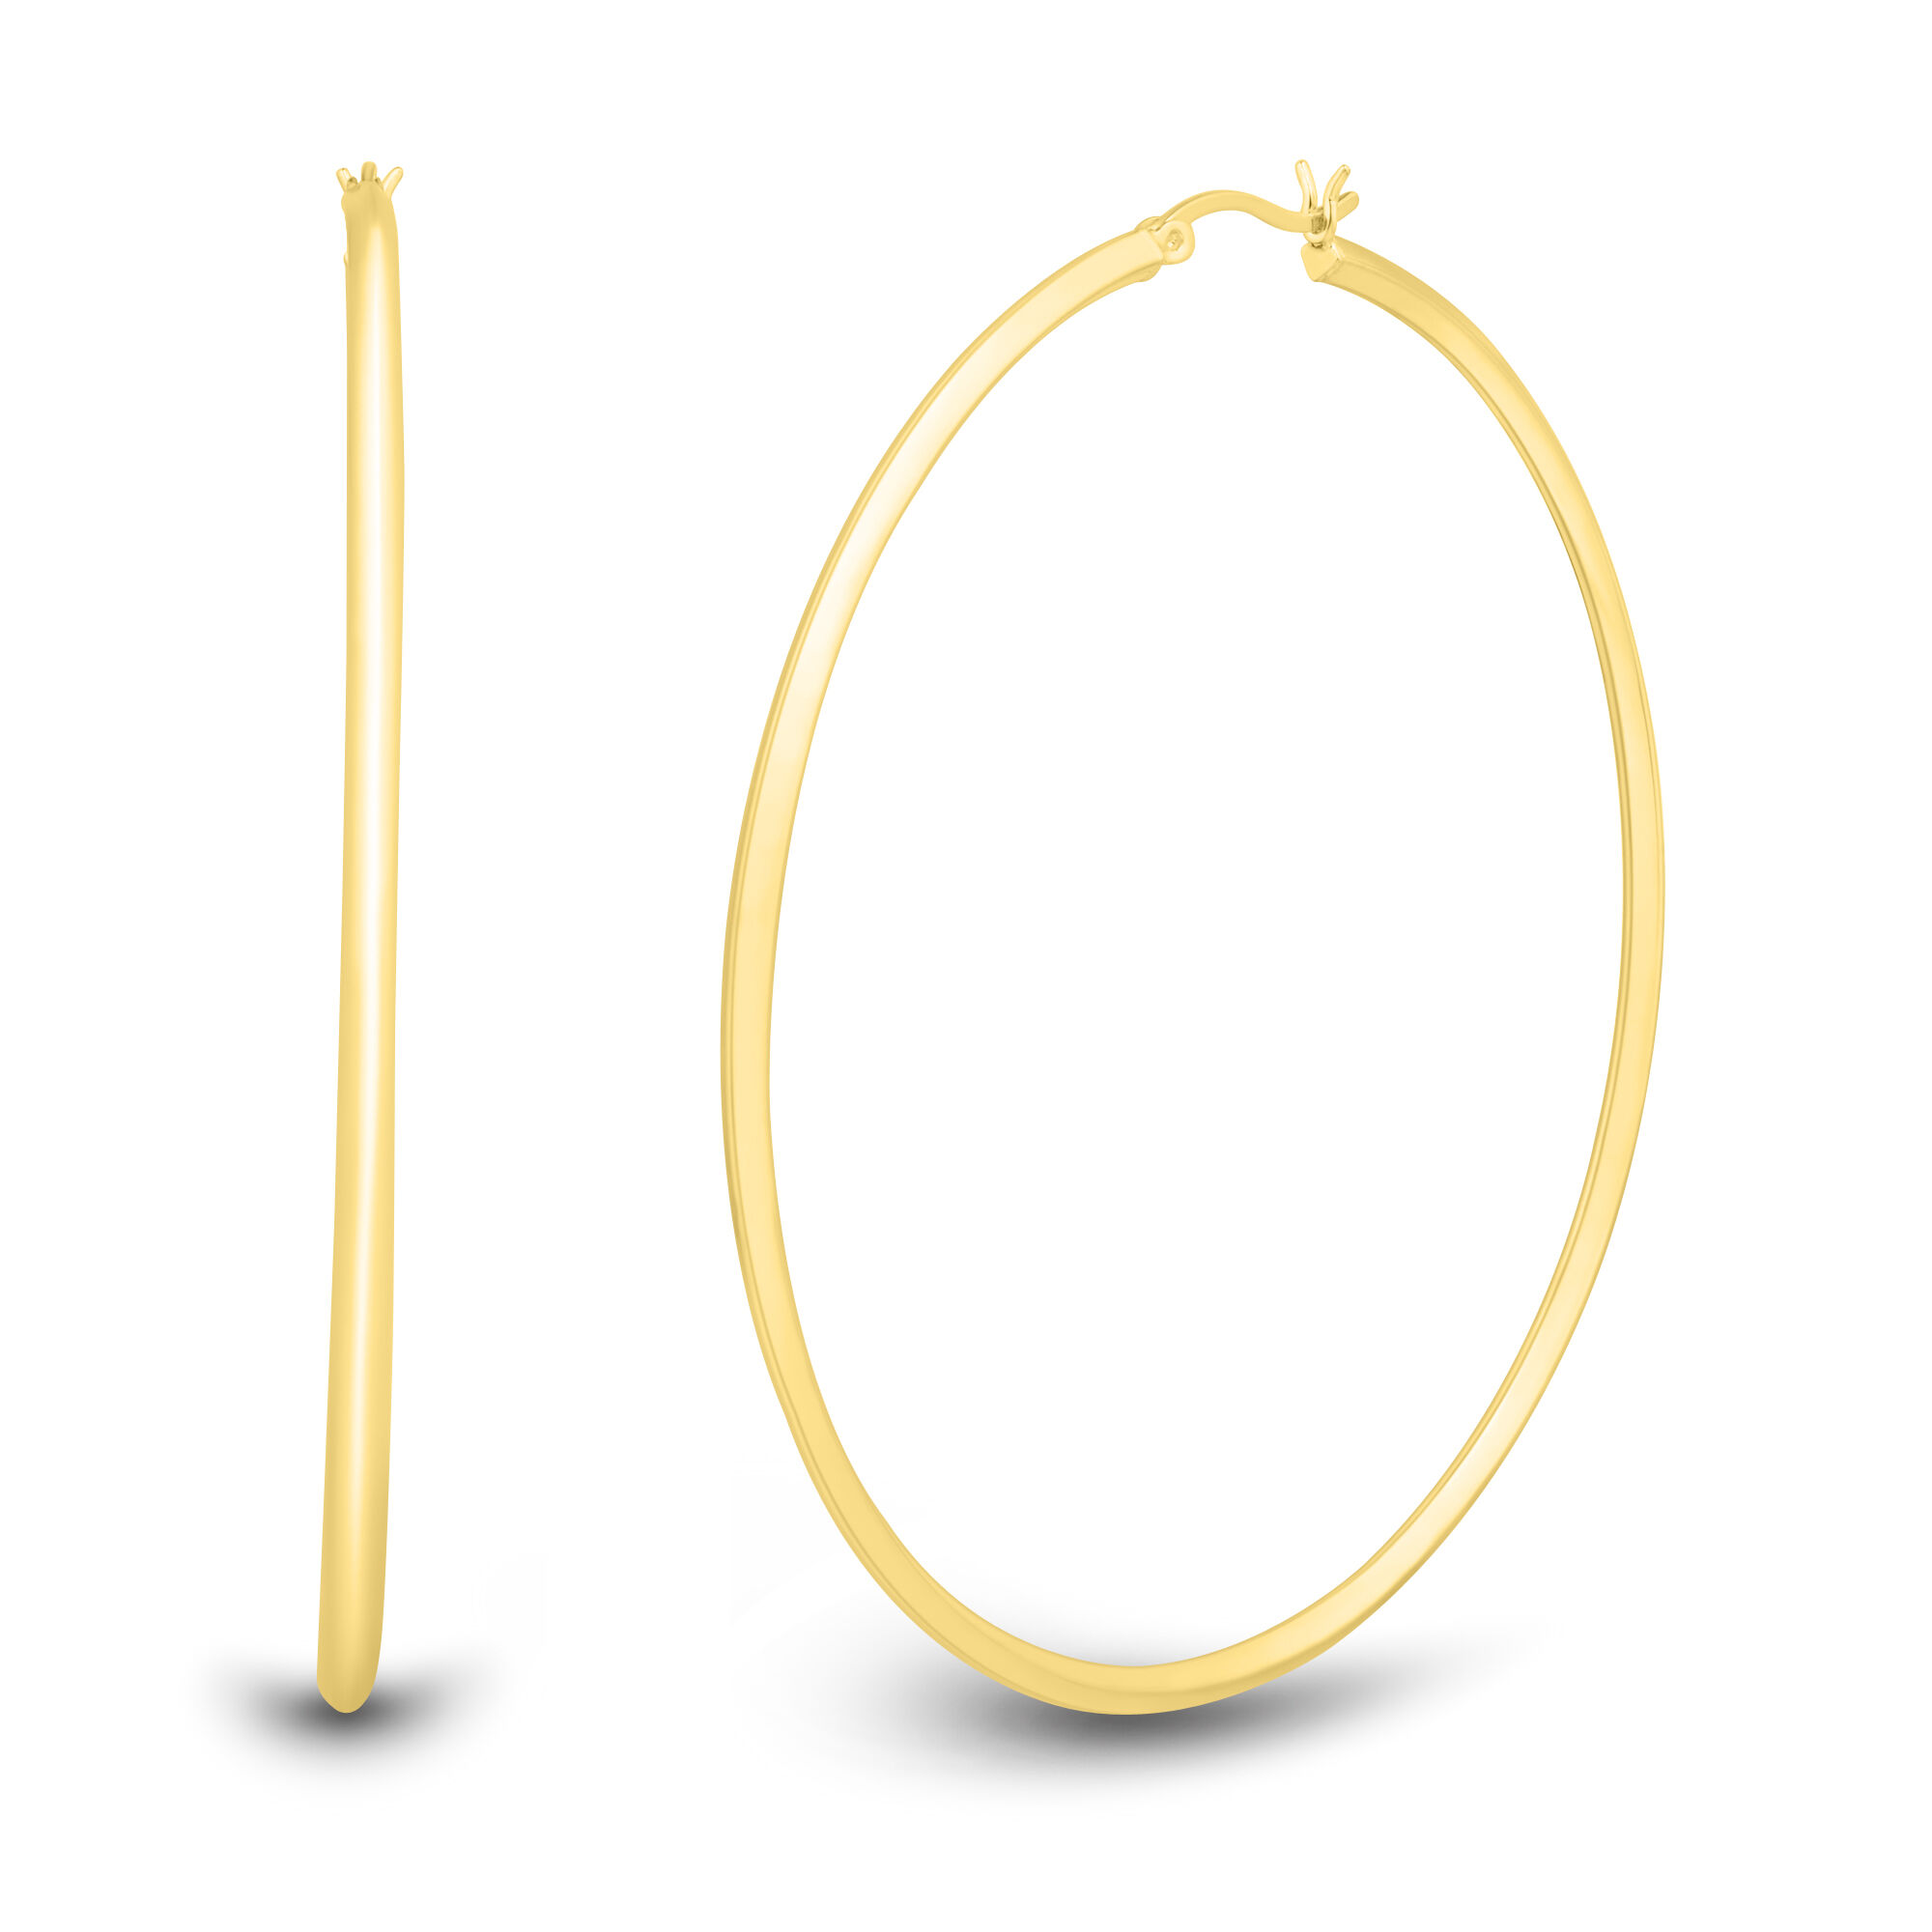 14K Yellow Gold 3MM Round Hoop Earrings 3 Inch Hoops Snap Closure Classic  Large Hoops for Women 7.1 Grams - Etsy